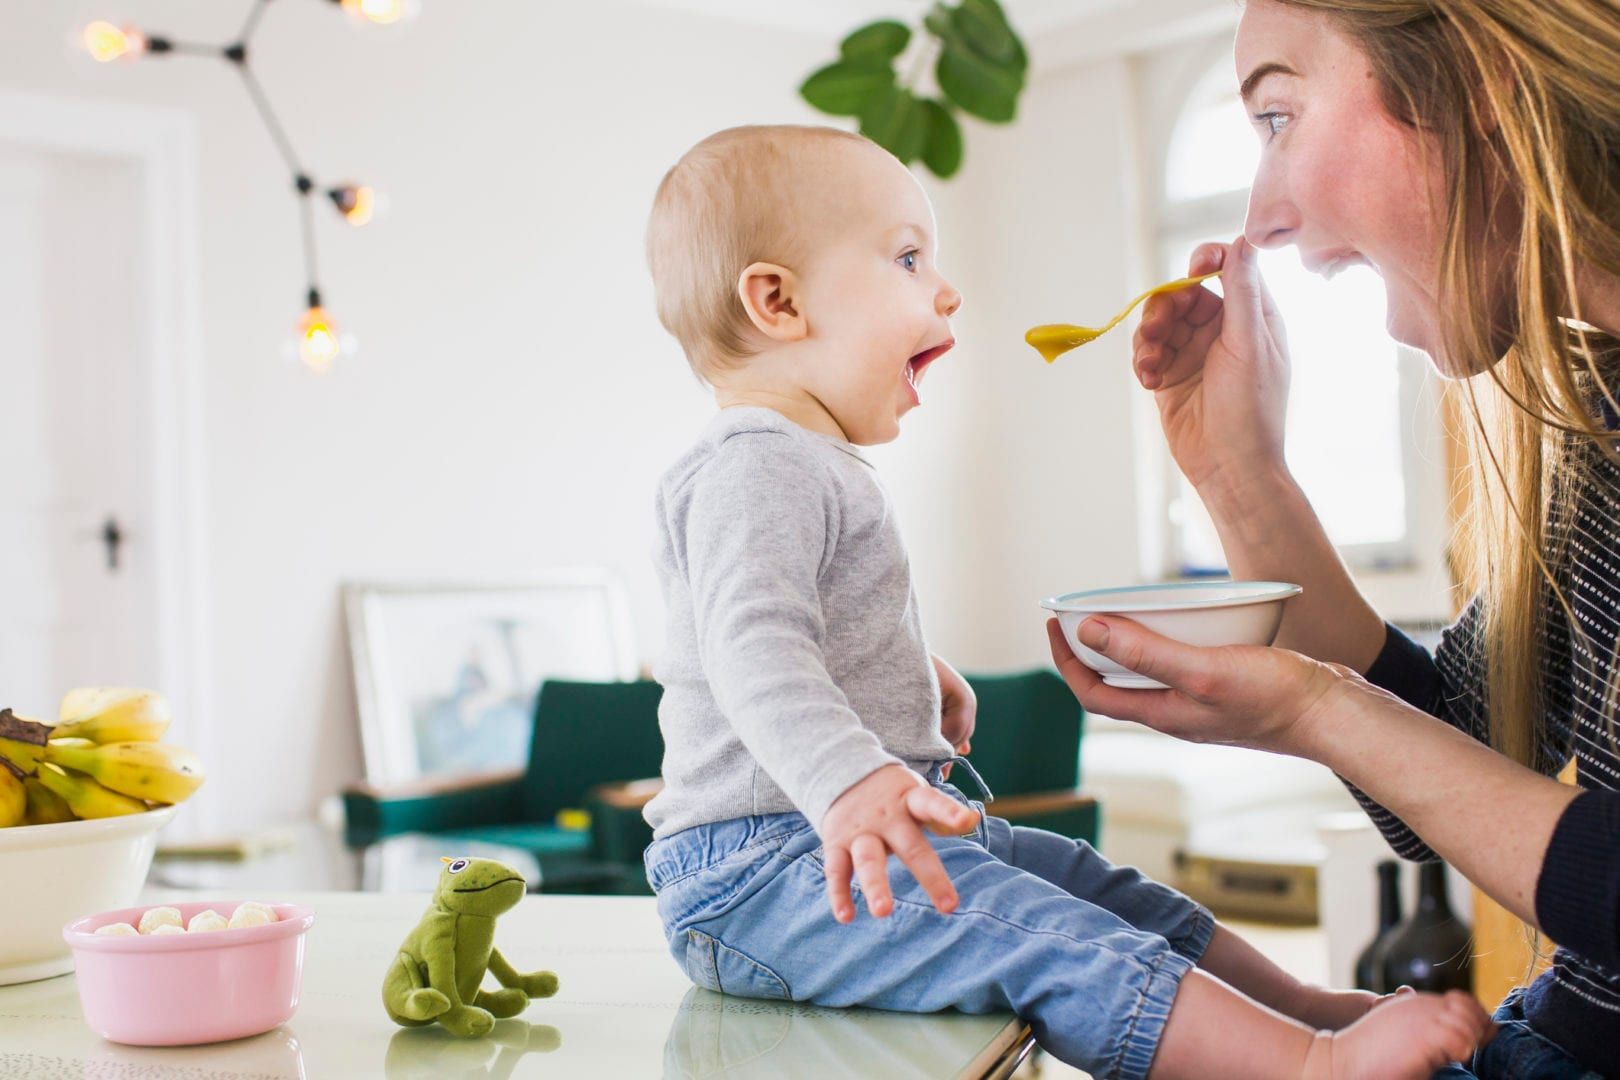 The tips you need to heat, store and prepare baby food safely